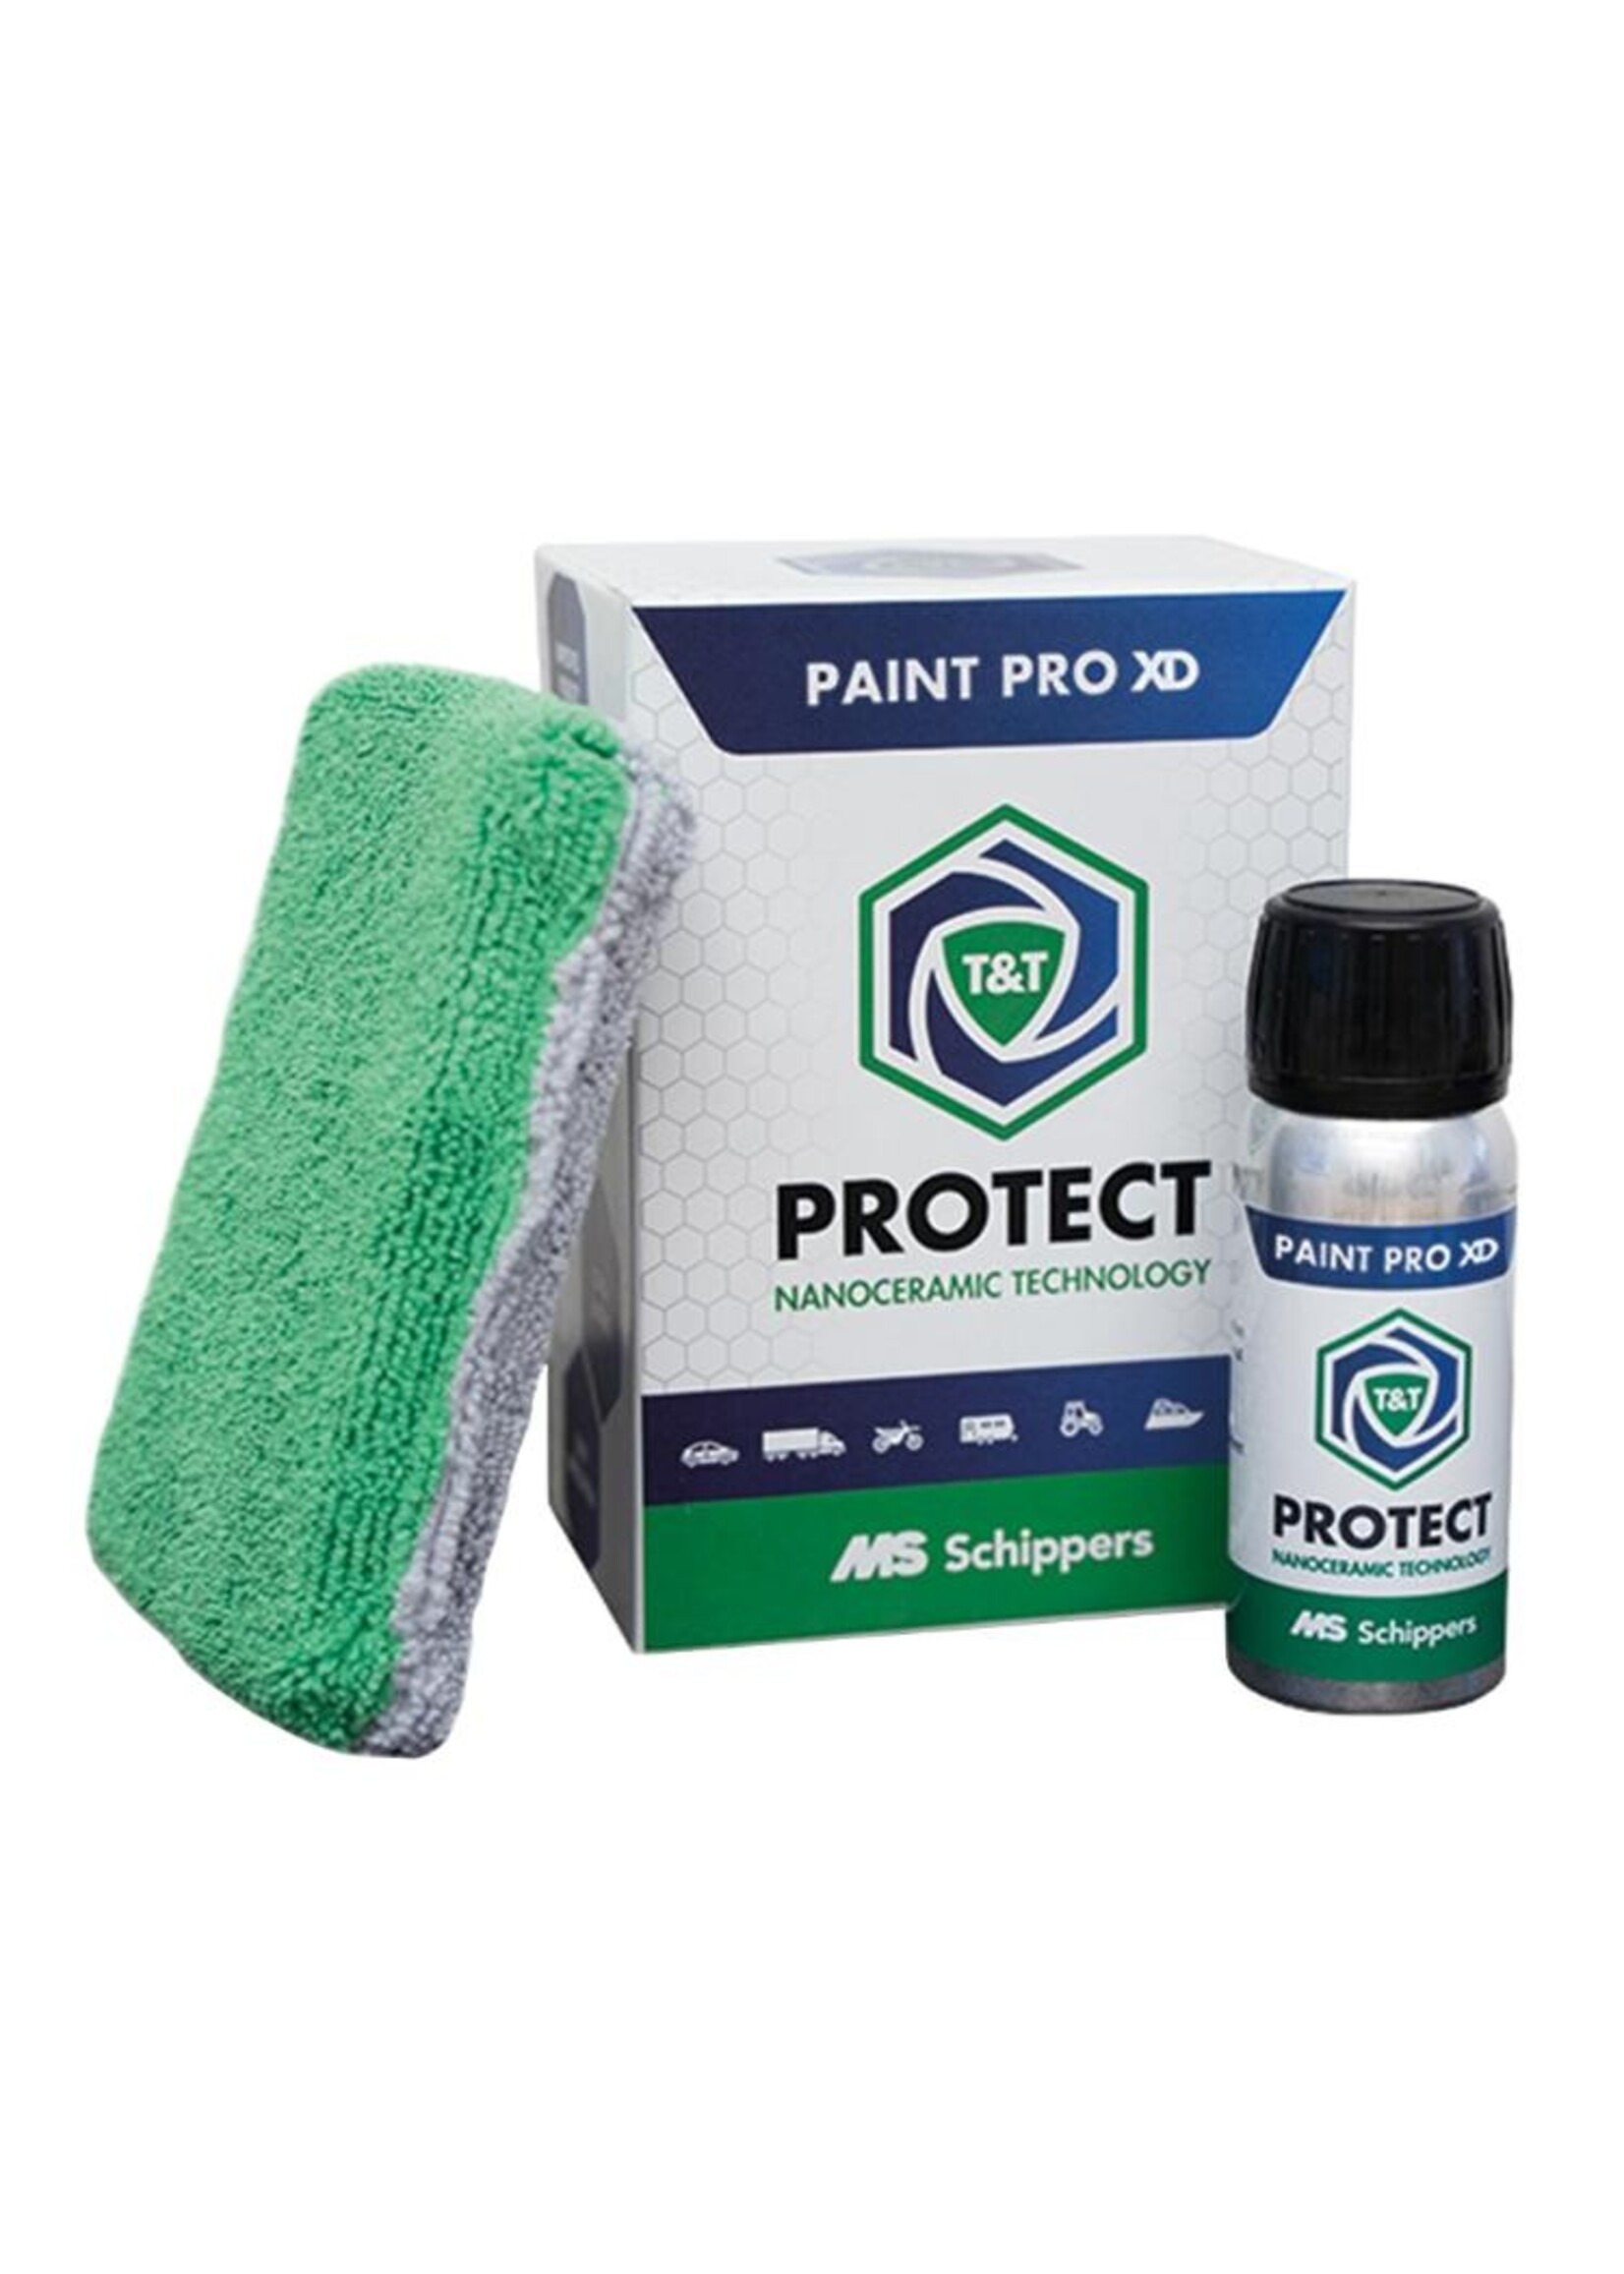 MS Schippers T&T Protect Paint